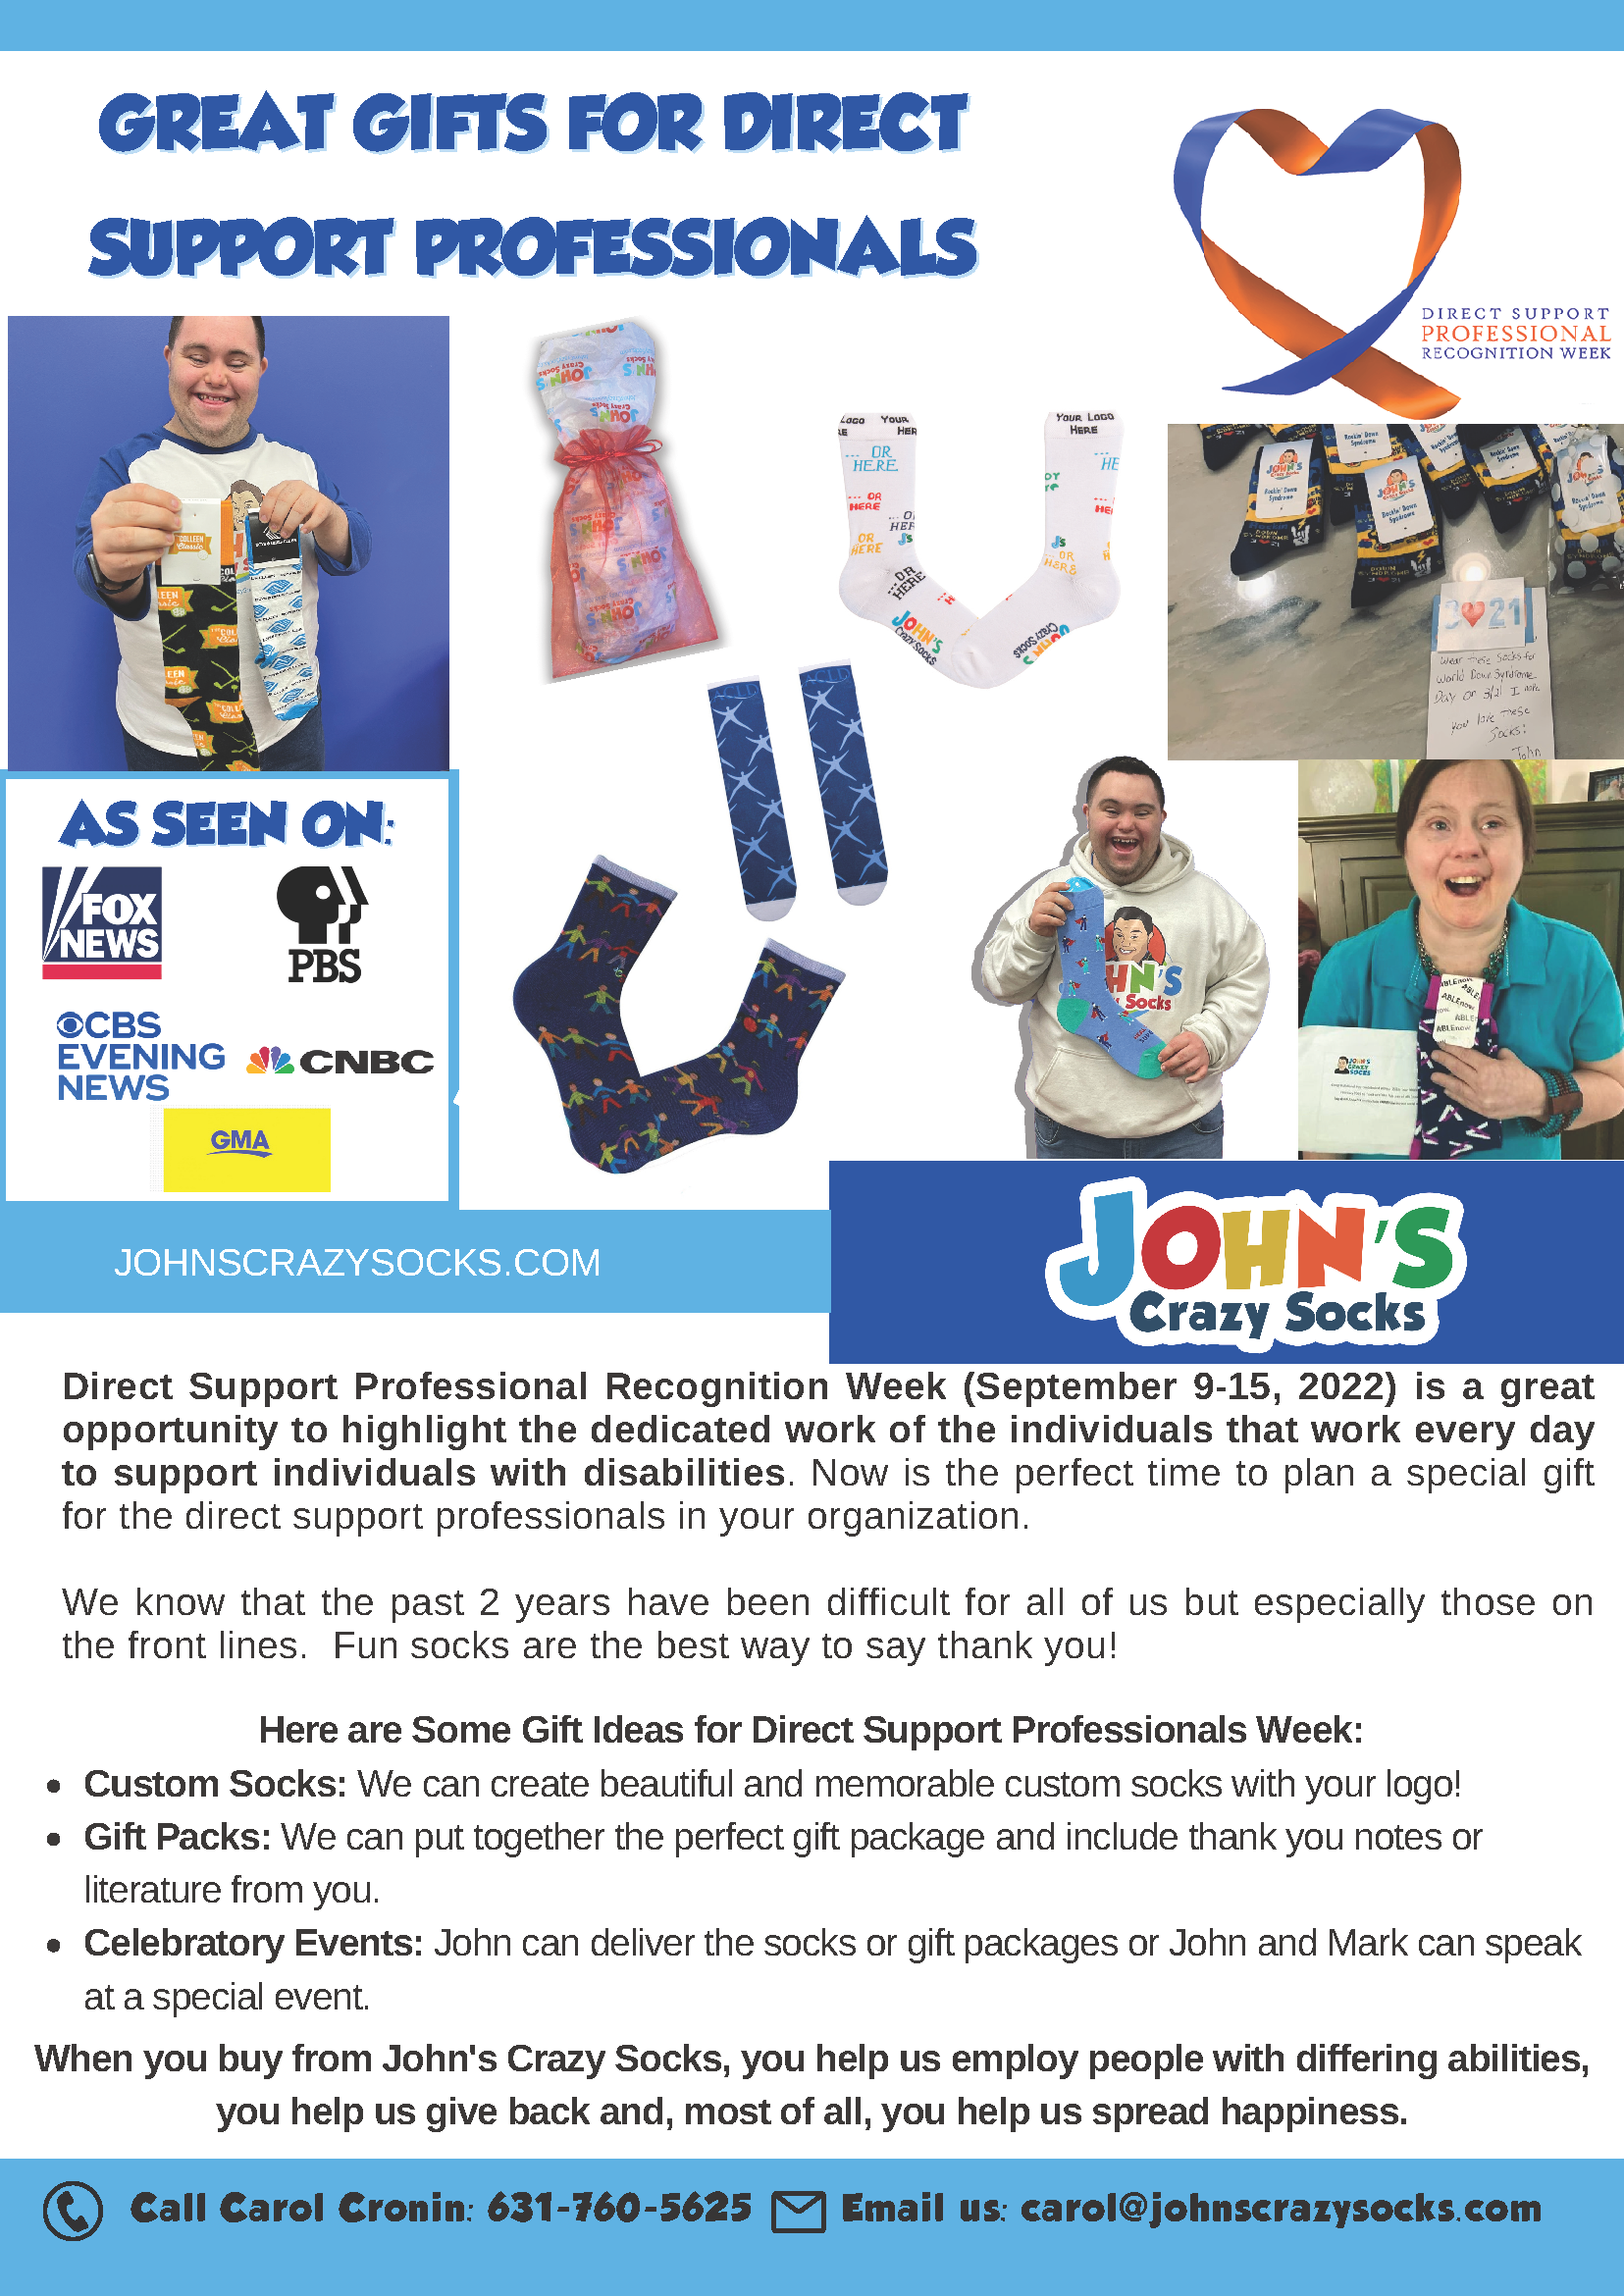 Let John’s Crazy Socks Help You Celebrate Your Direct Support Professionals